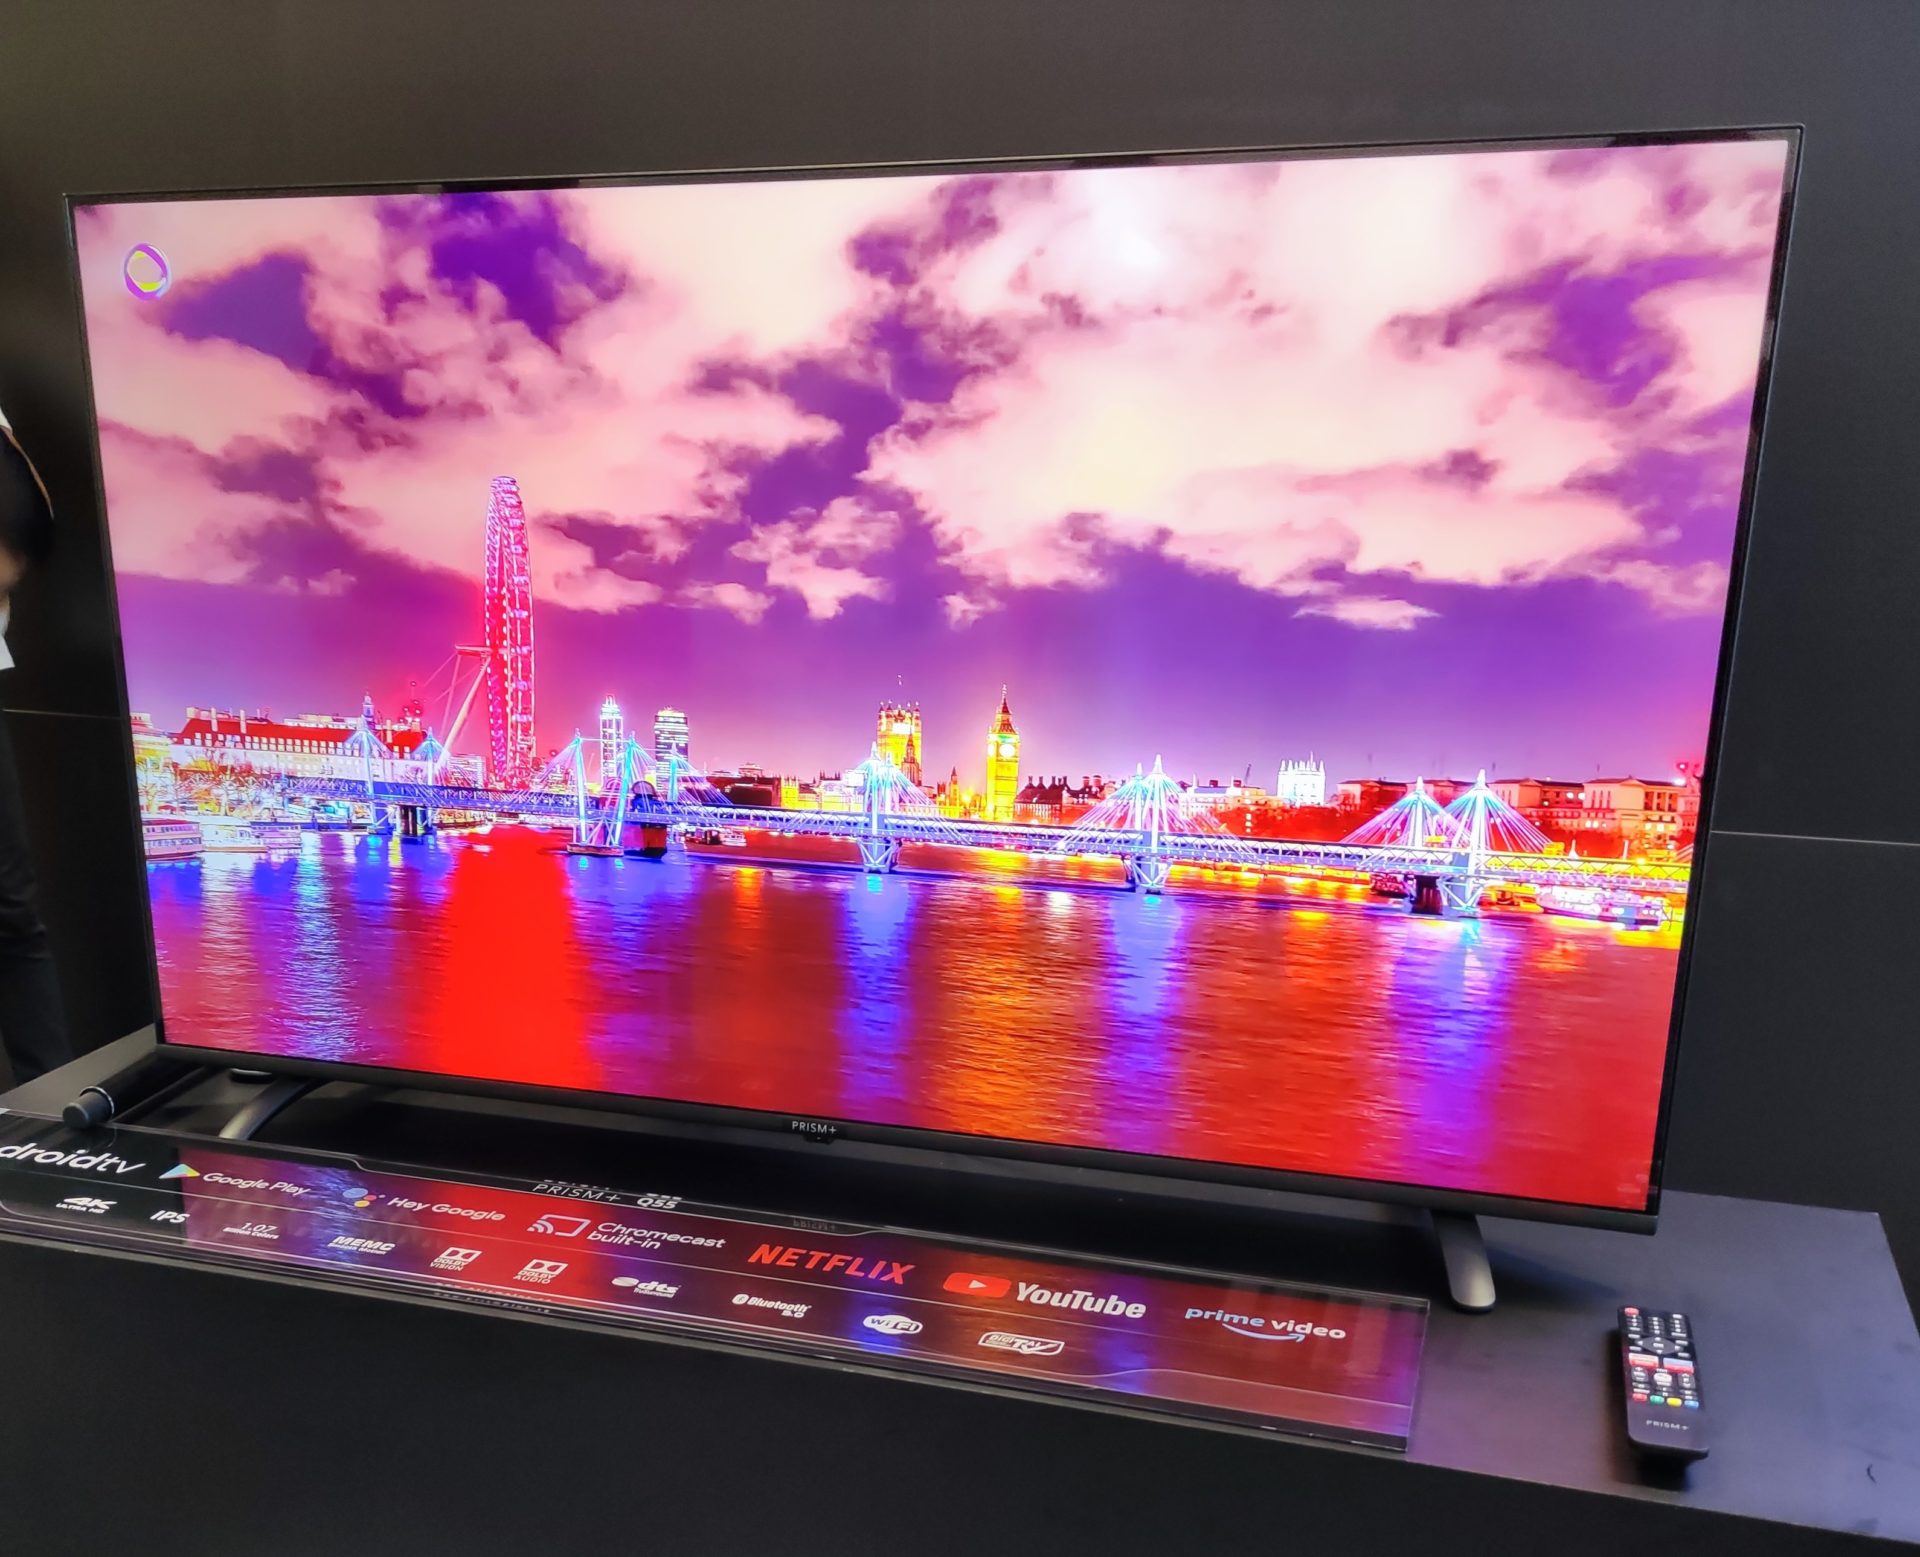 Looking for new TVs? Here are 3 new Android Smart TVs from PRISM+ to